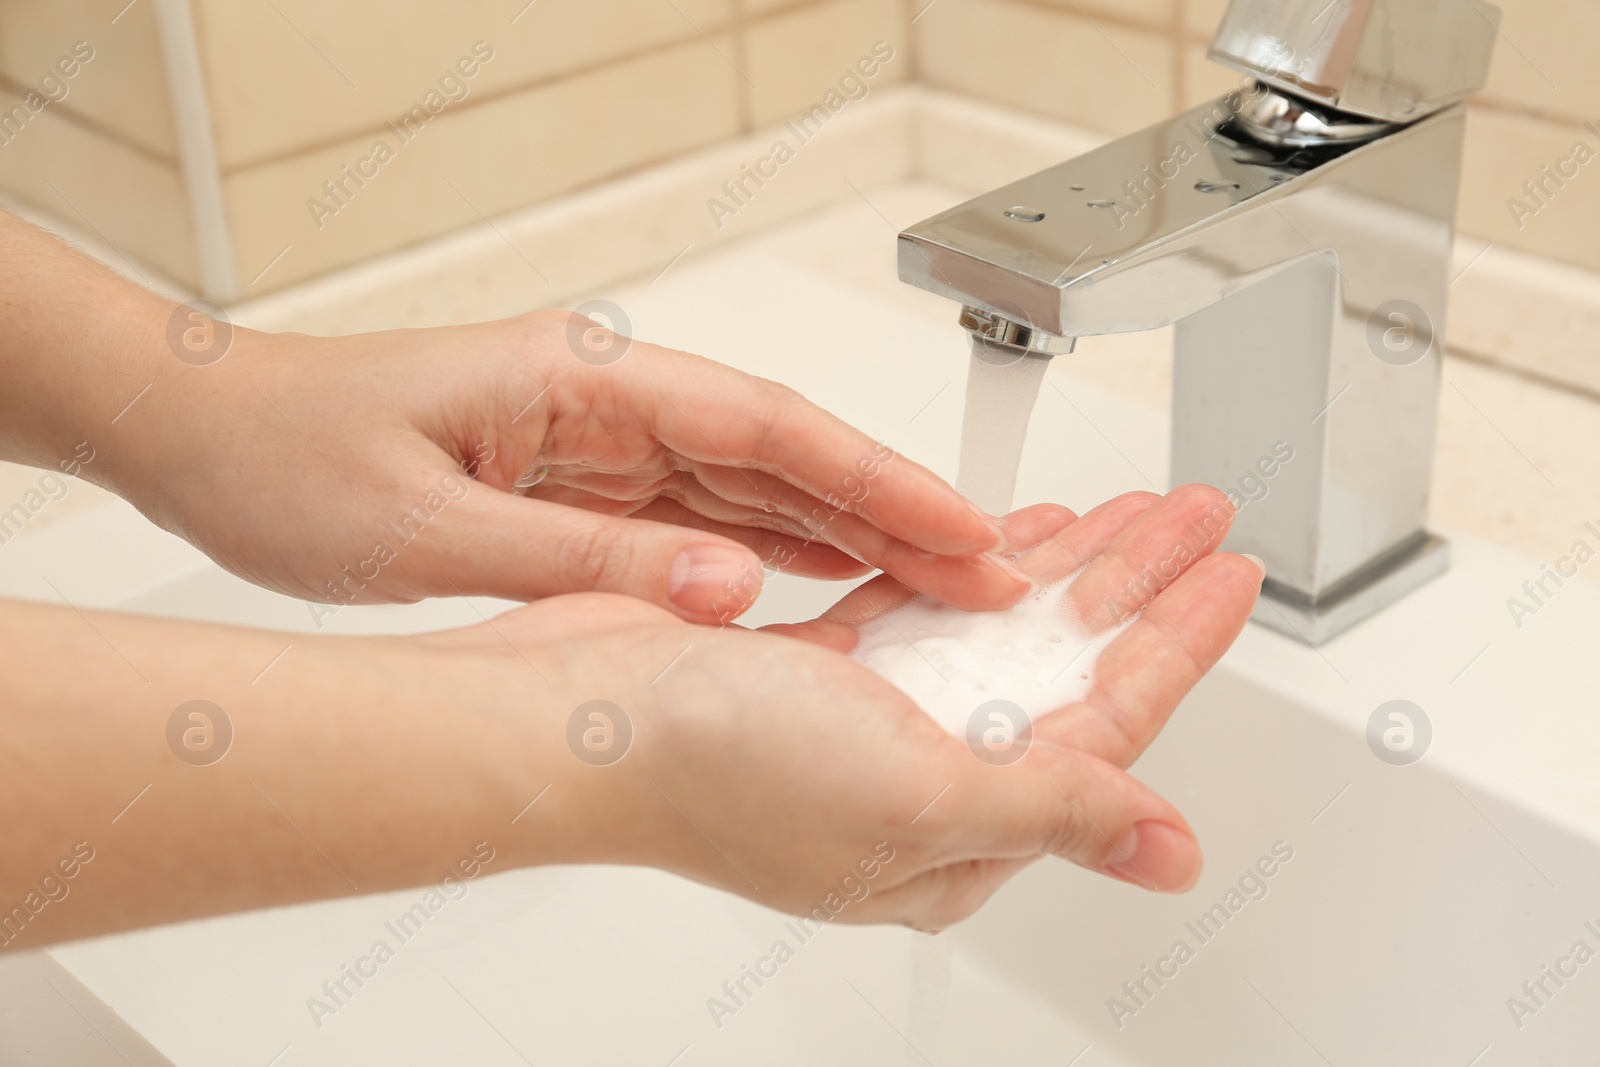 Photo of Woman washing hands with antiseptic soap in bathroom, closeup